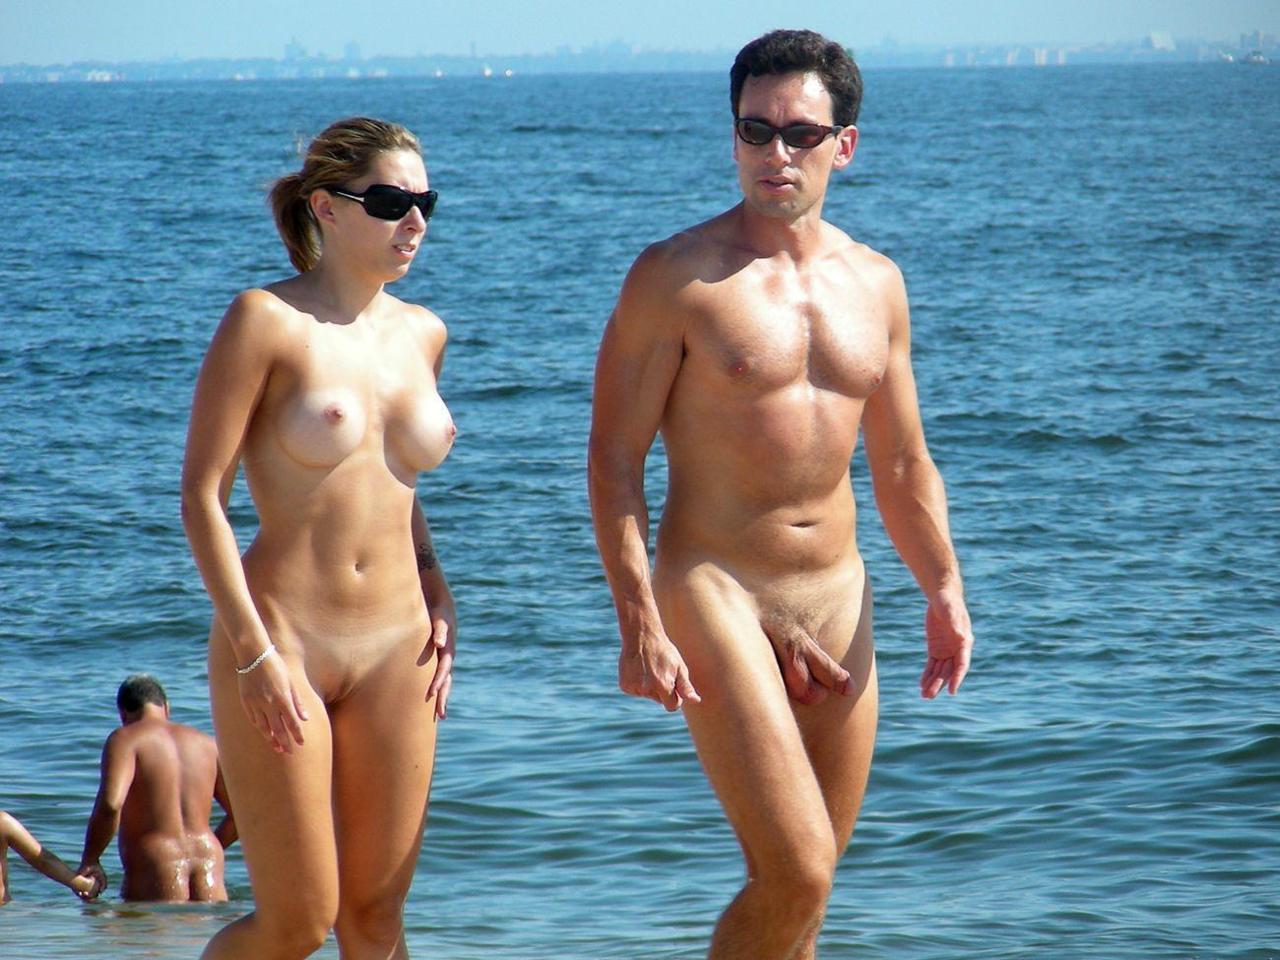 Pictures of nudist beaches in rhodes